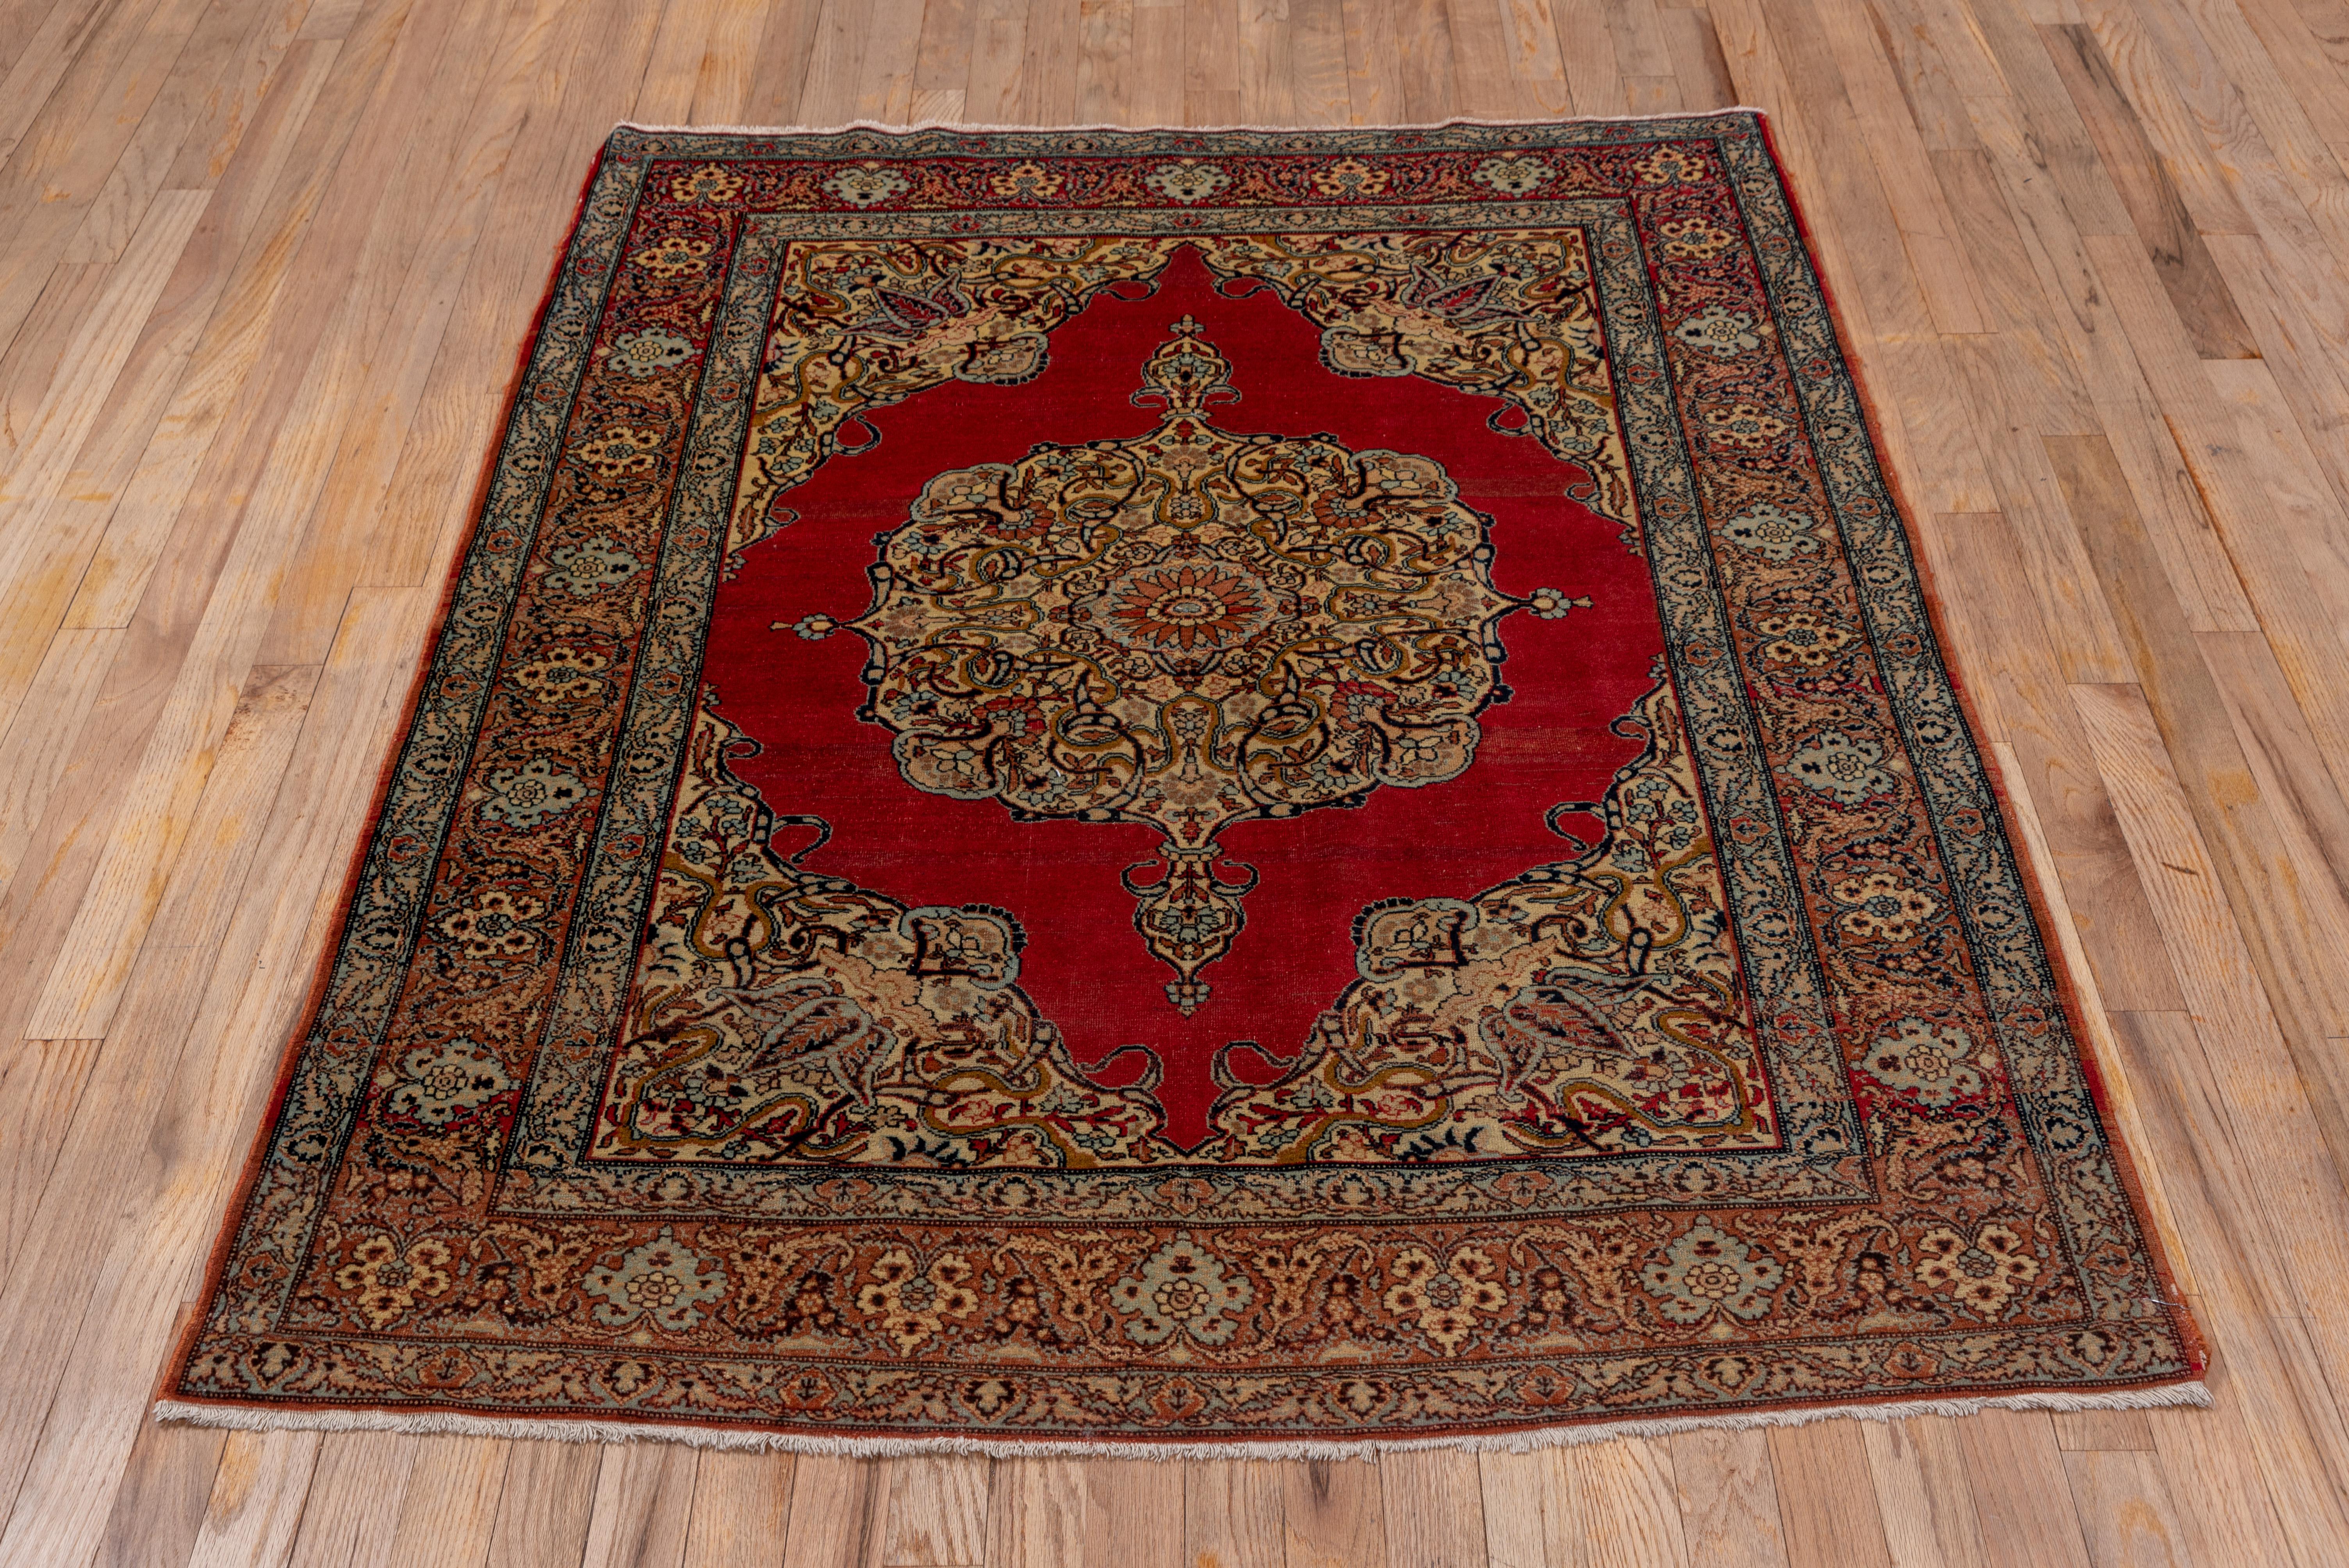 Hand-Knotted Antique Persian Tabriz Rug, Red Field, Coral Borders, Medium Pile For Sale